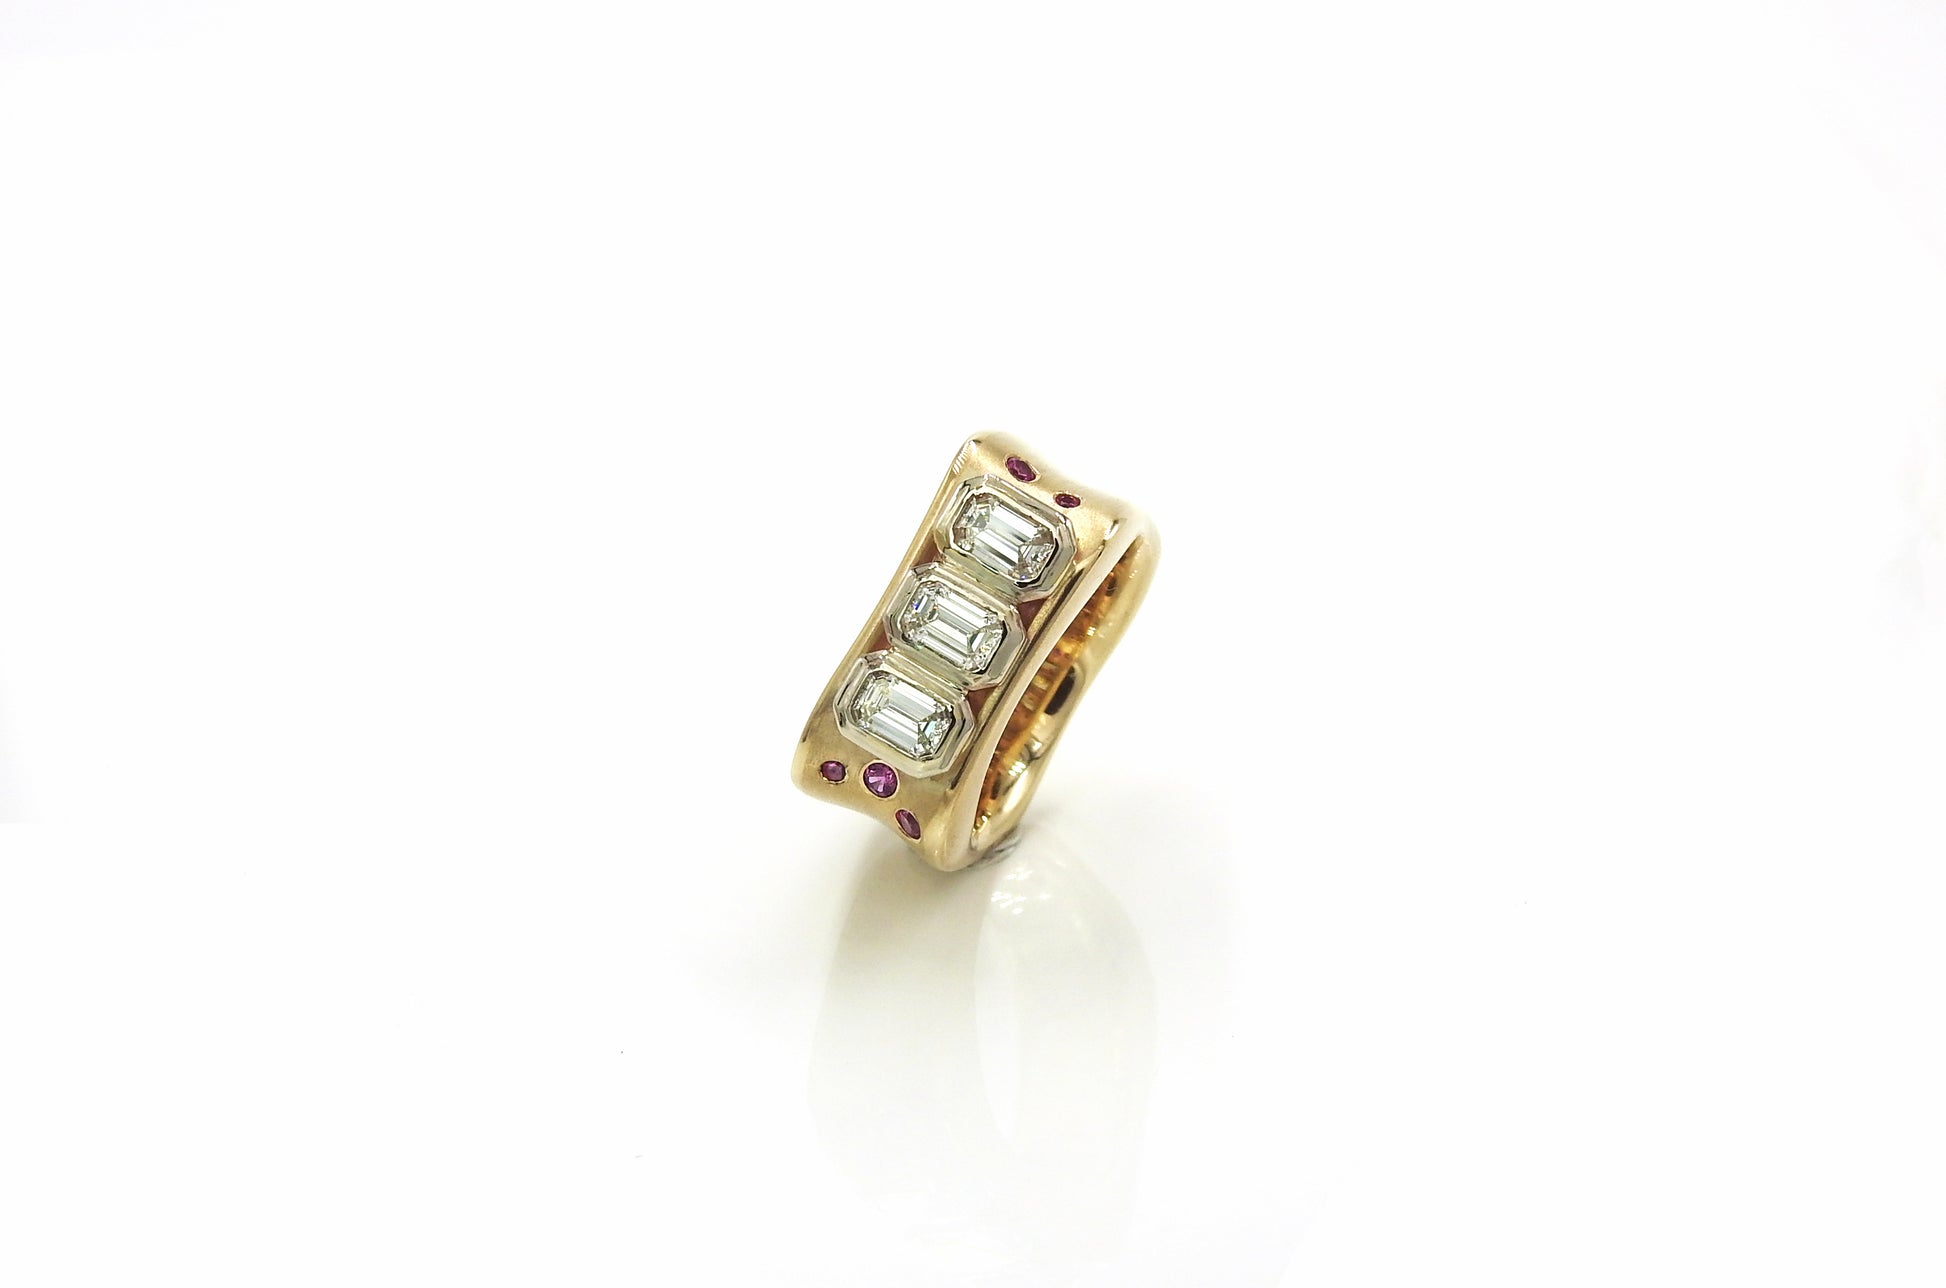 Bespoke ring, Custom ring, Organically you, in 14kt yellow gold, emerald cut diamonds, pink sapphires, by ZEALmetal, Nicole Horlor, in Kingston, ON, Canada